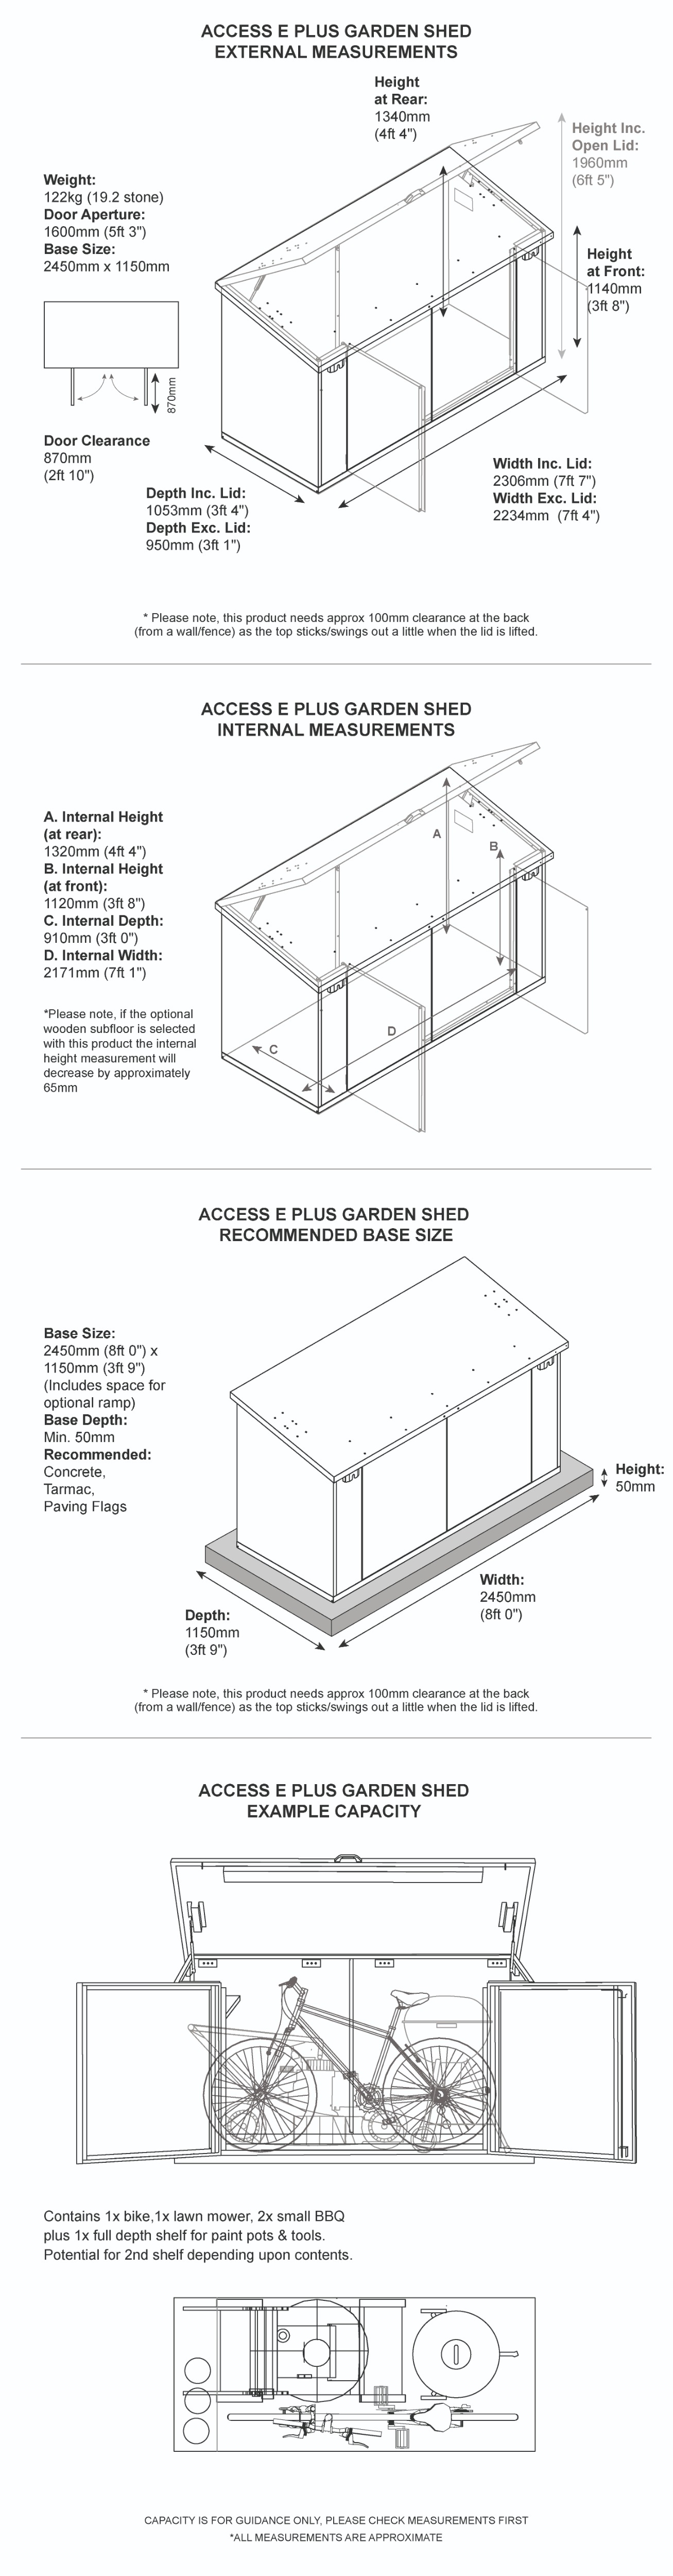 Access metal garden shed with power - dims